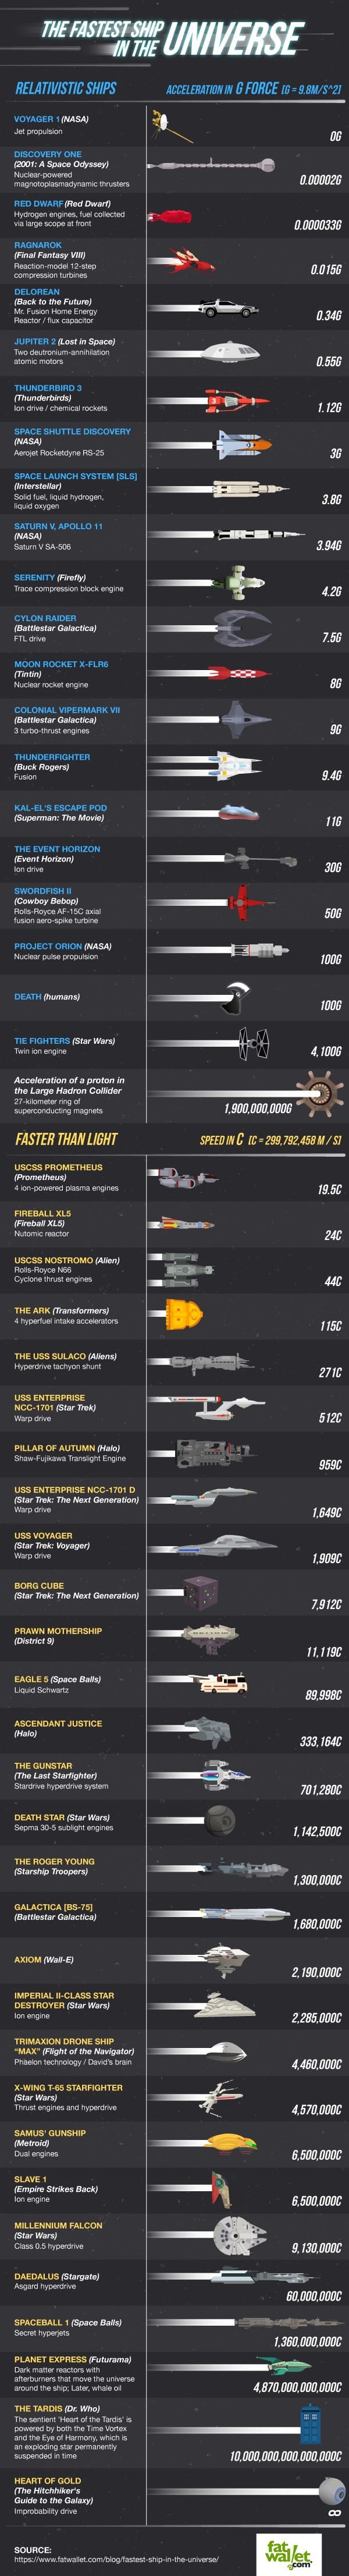 Fastest Ships in the Universe